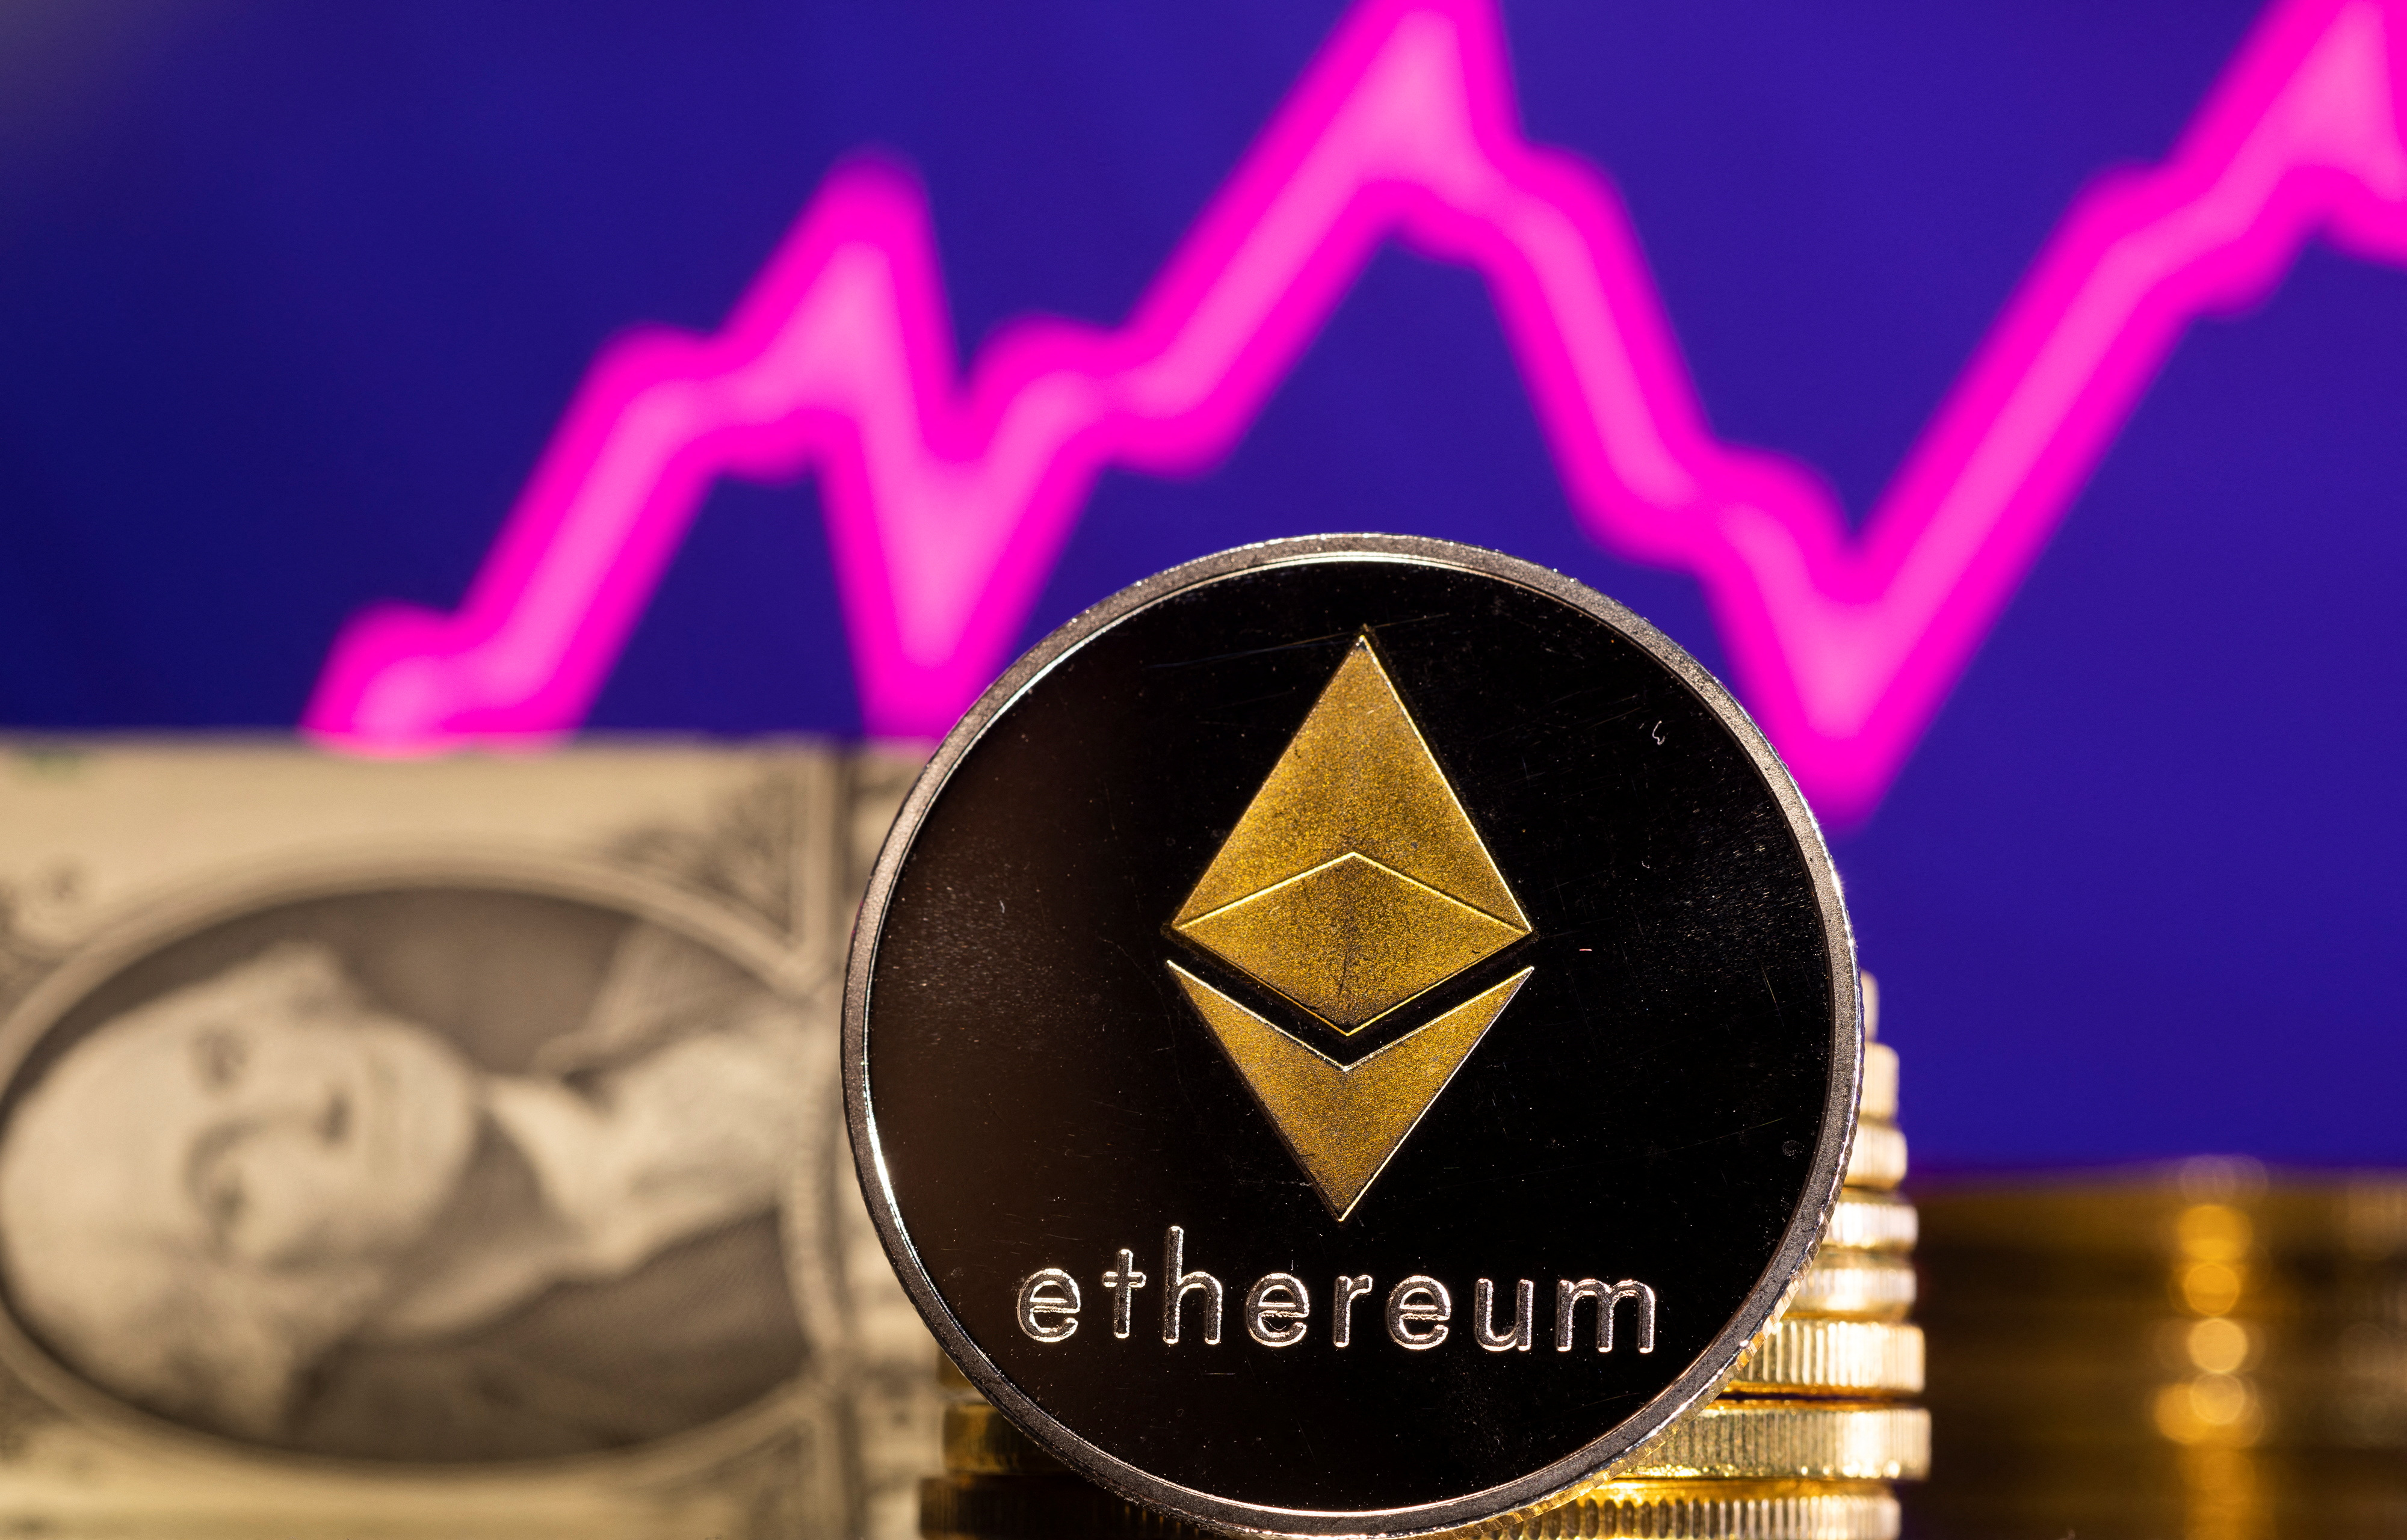 Illustration shows representations of cryptocurrency Ethereum